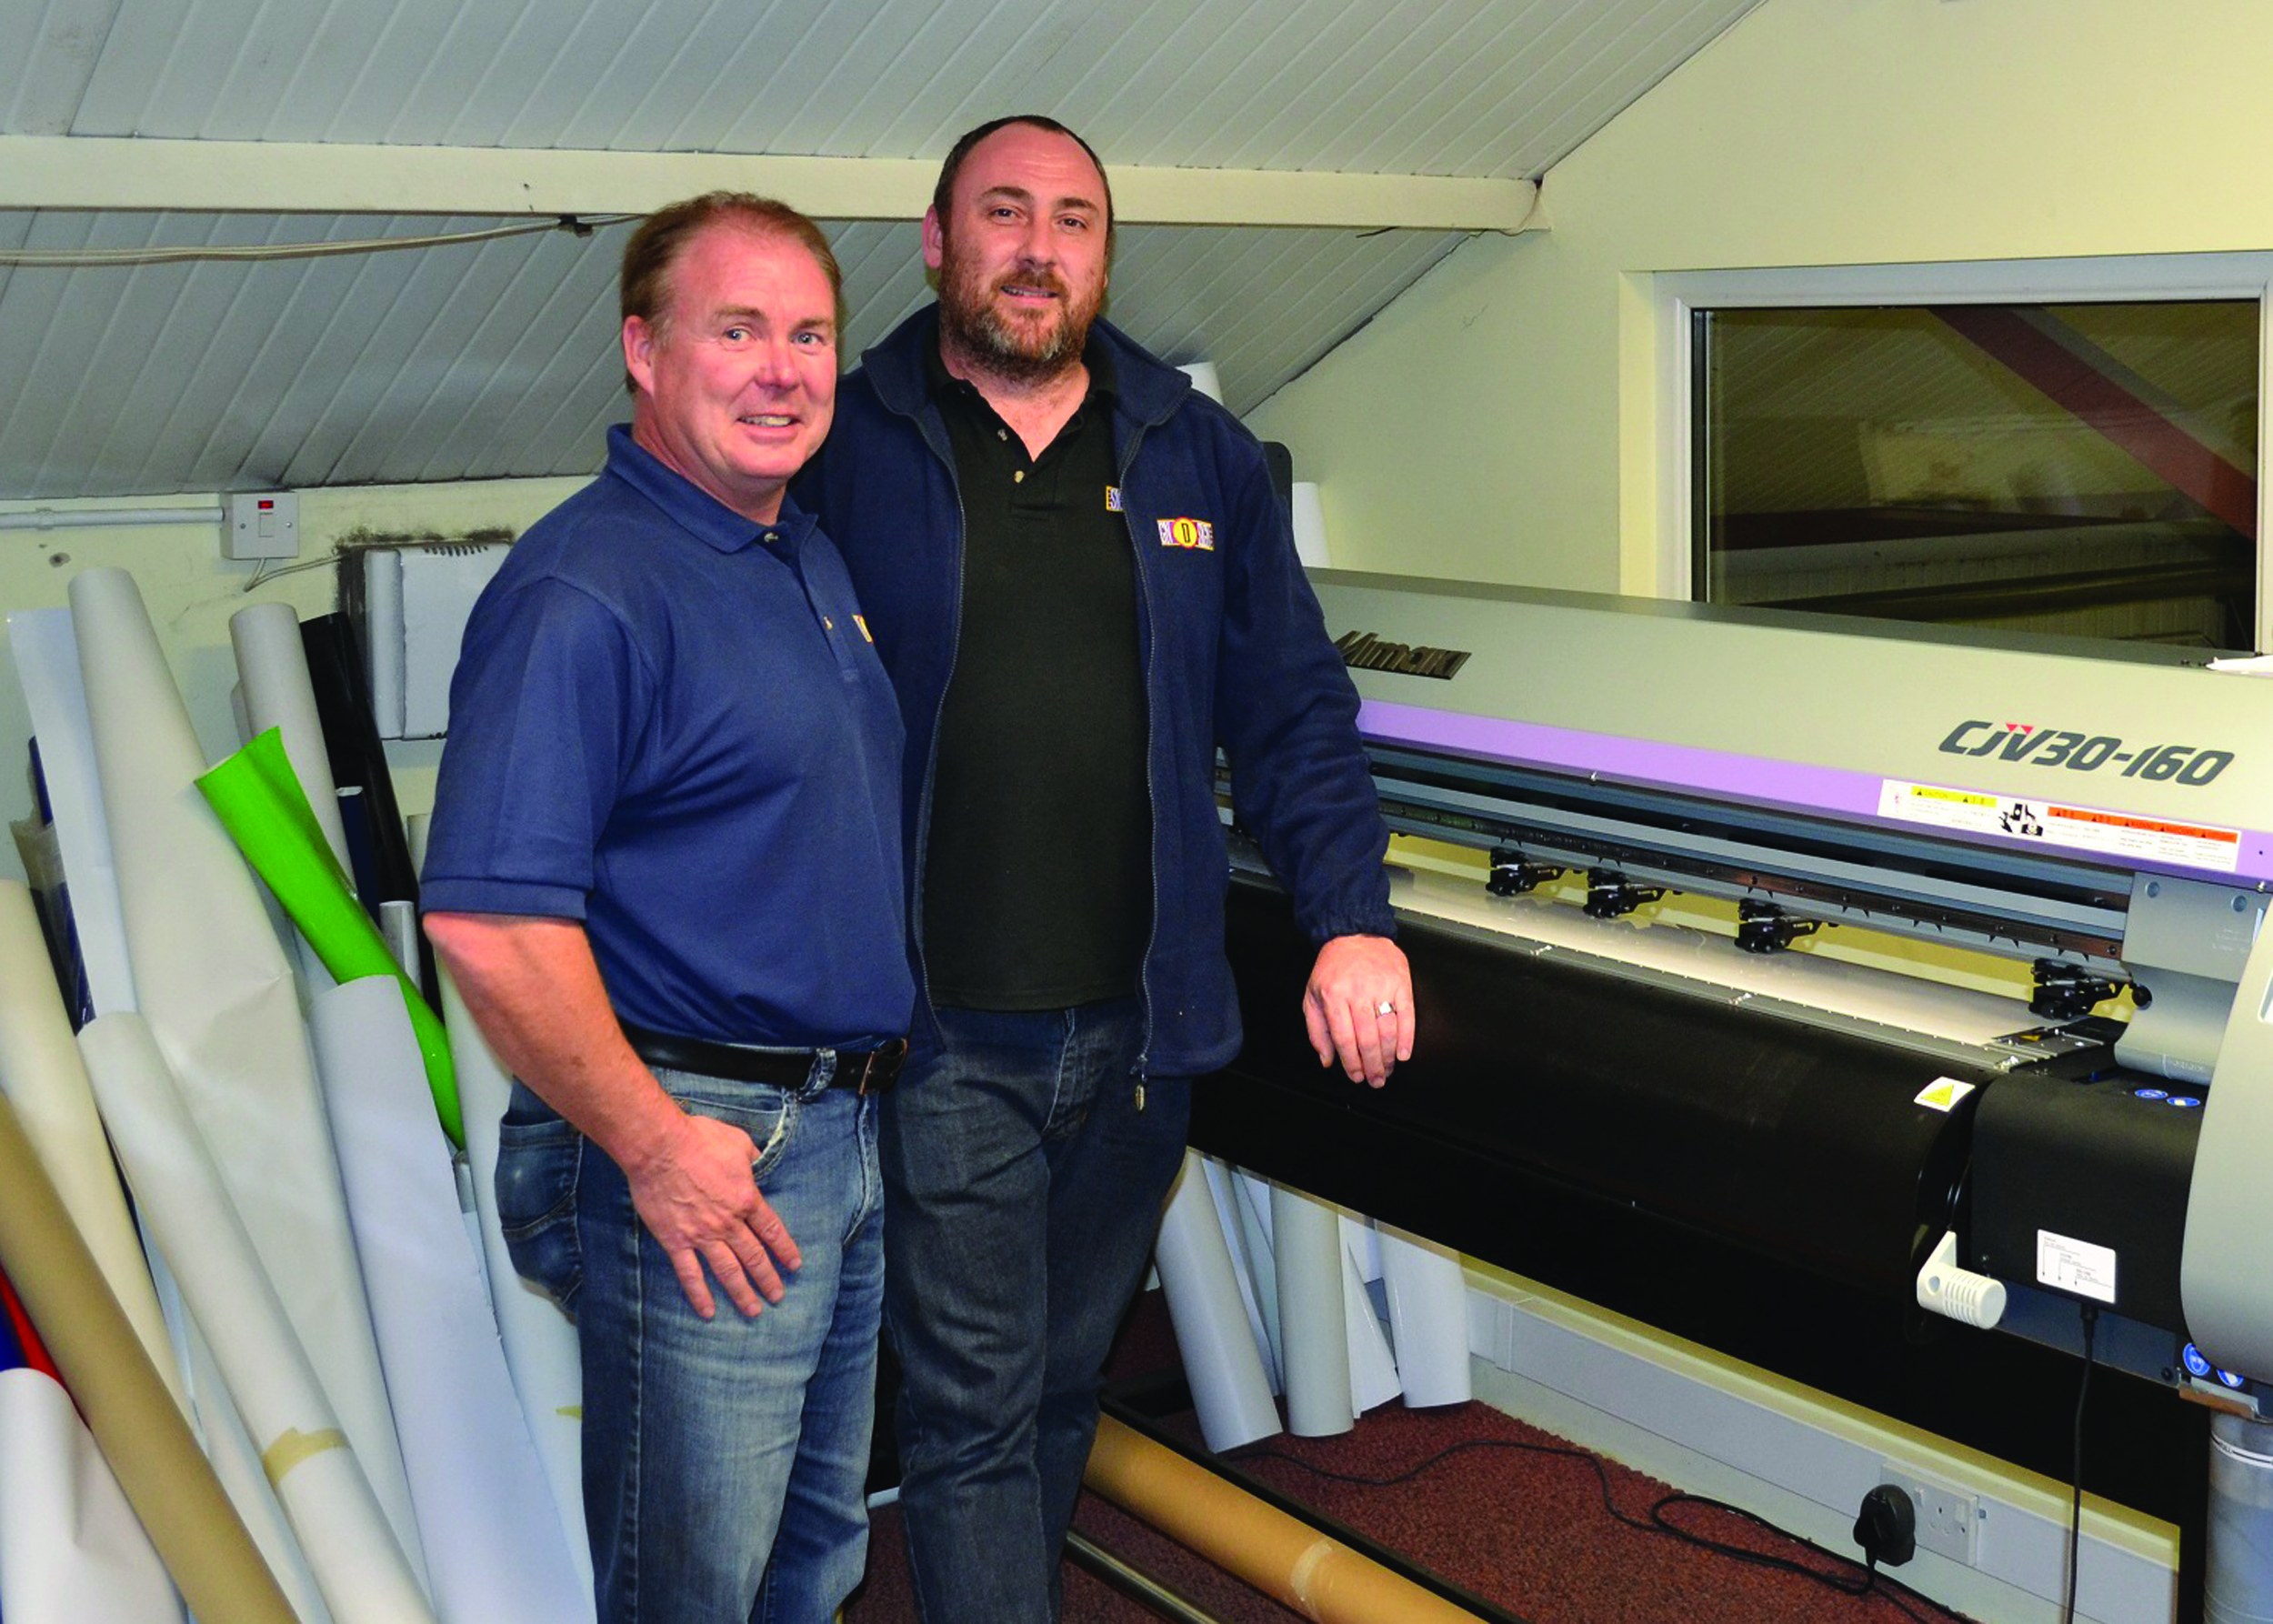 Sign D Sign’s Albert Watson and Glenn MacPherson with the company’s new Mimaki CJV30